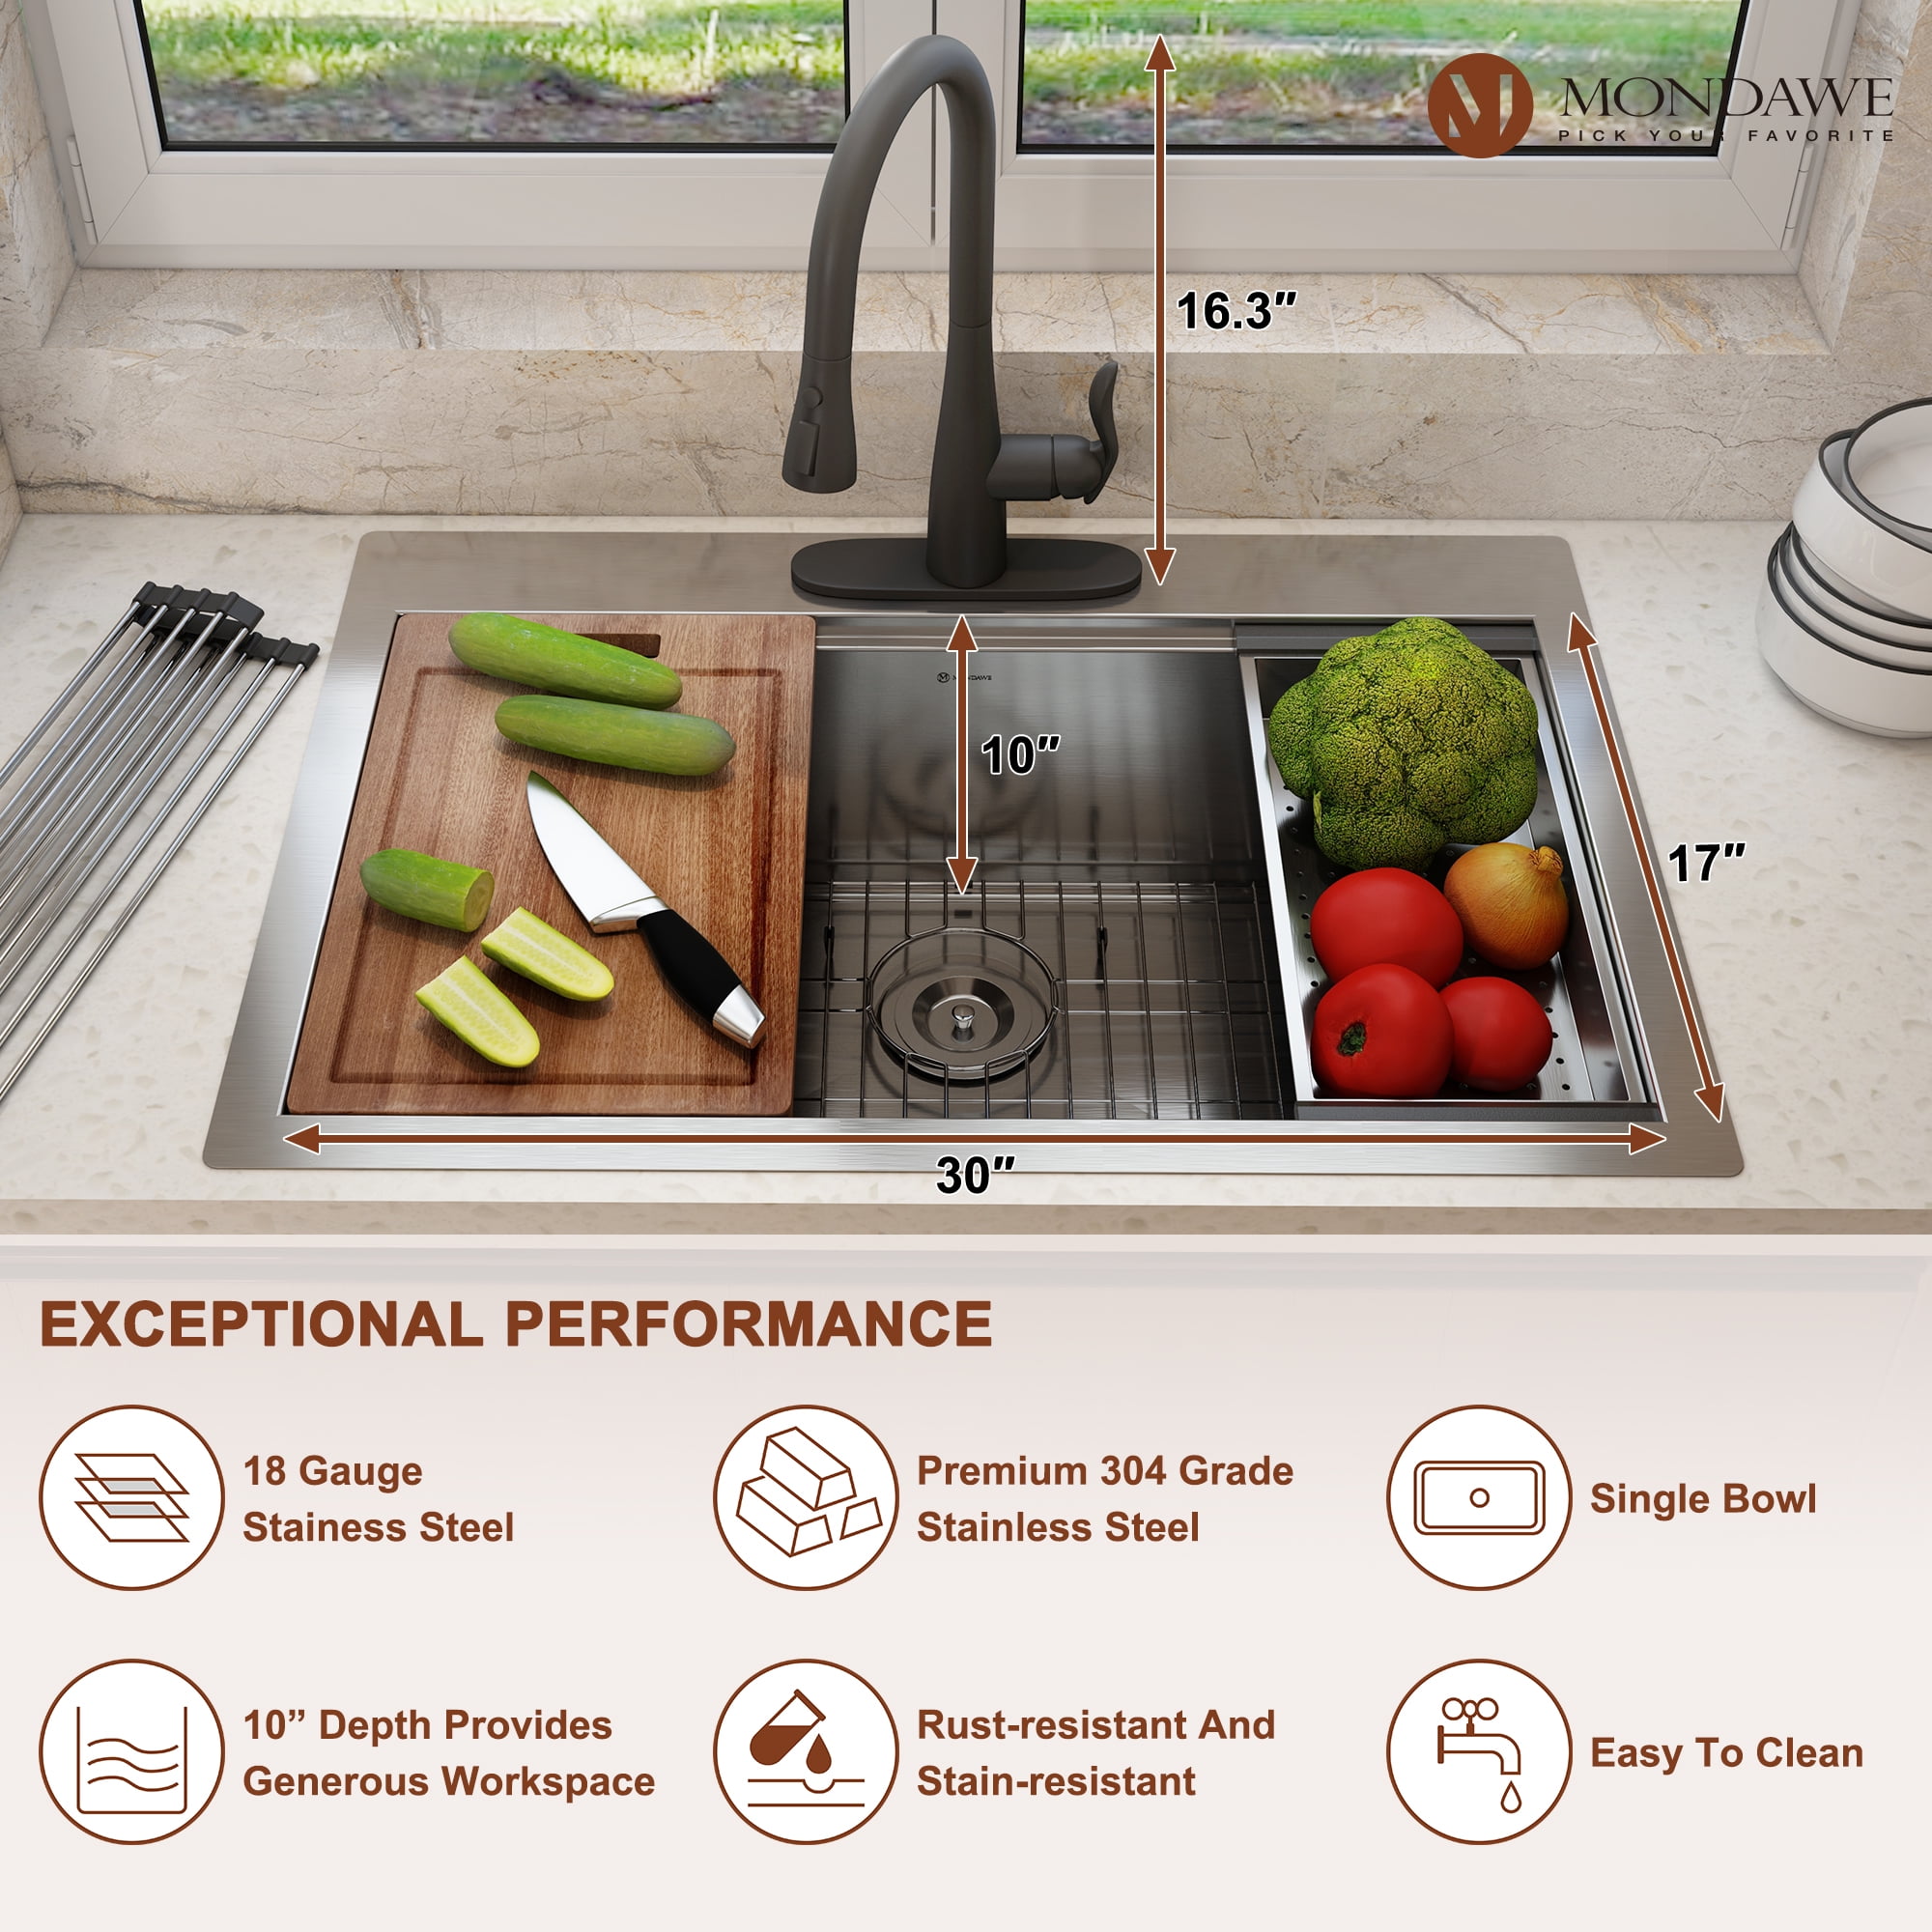 33” Stainless Steel Workstation Kitchen Sink Drop-In Undermount Single Bowl  with WorkFlow™ Ledge and Accessories in Stainless Steel 95A9135-33S-SS-3D